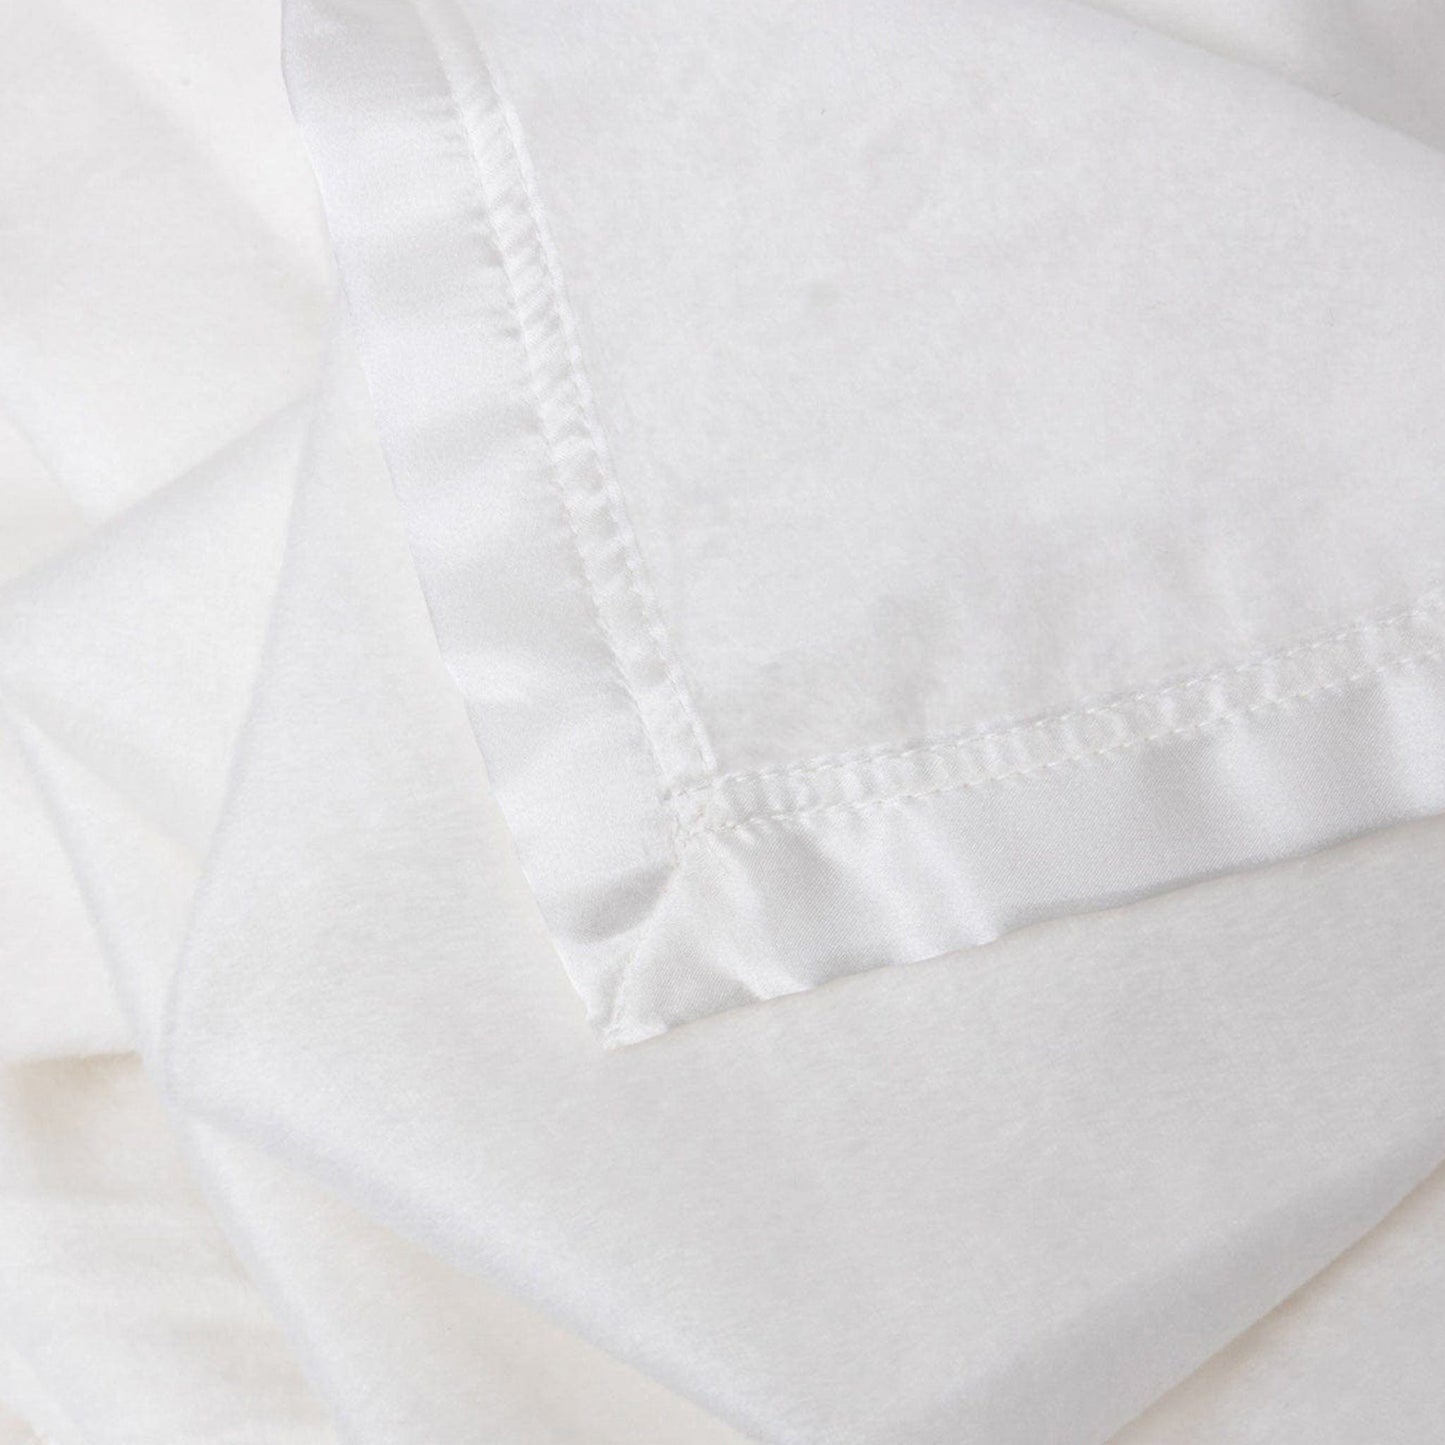 Super Soft Blanket Made From Eucalyptus - By Ethical Bedding